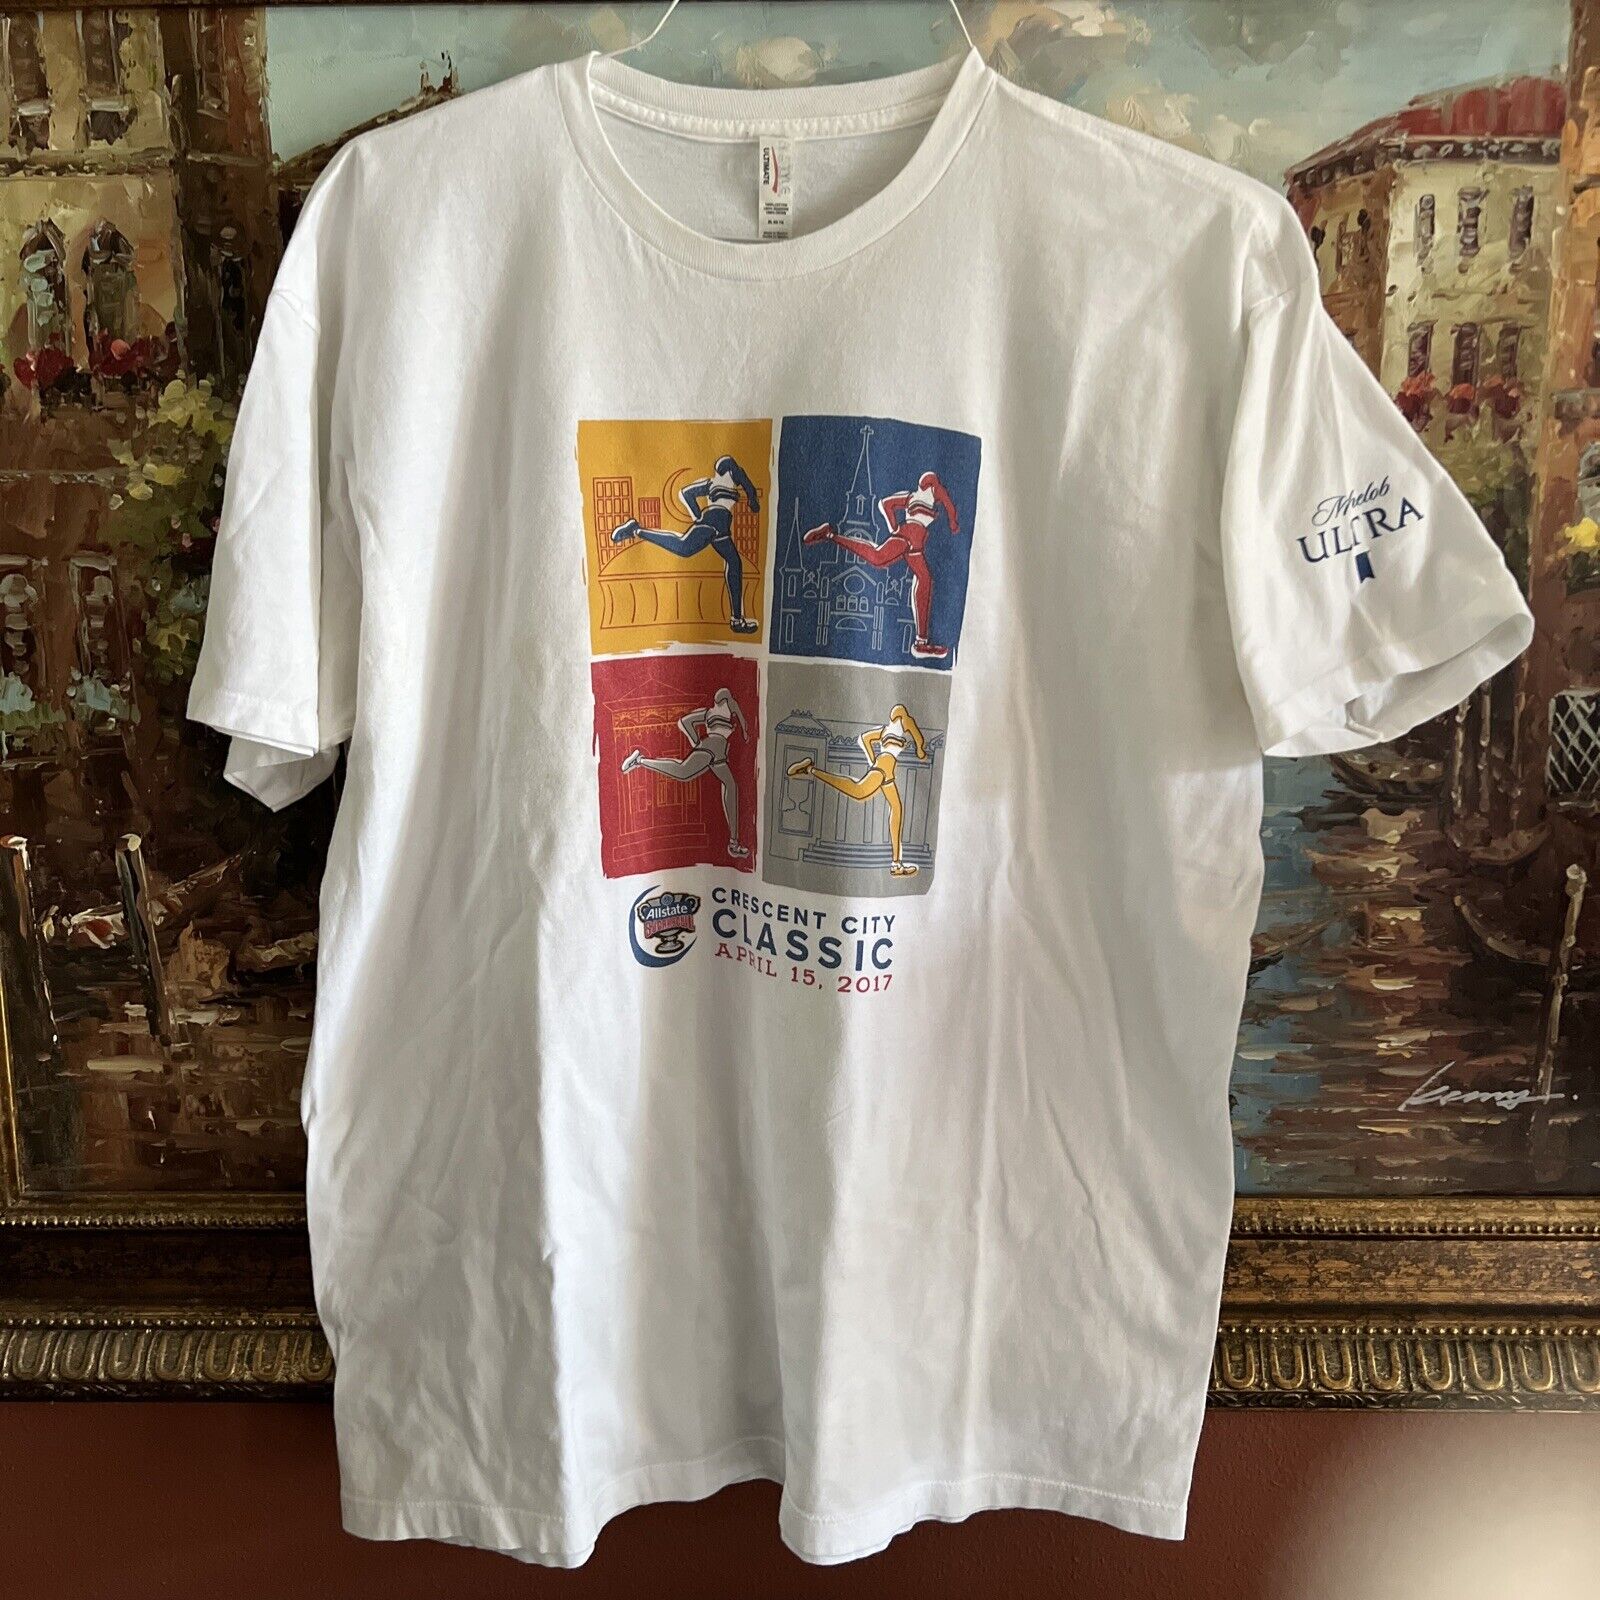 Lot of 2 Crescent City Classic New Orleans T Shirts 2016 & 2017 XL